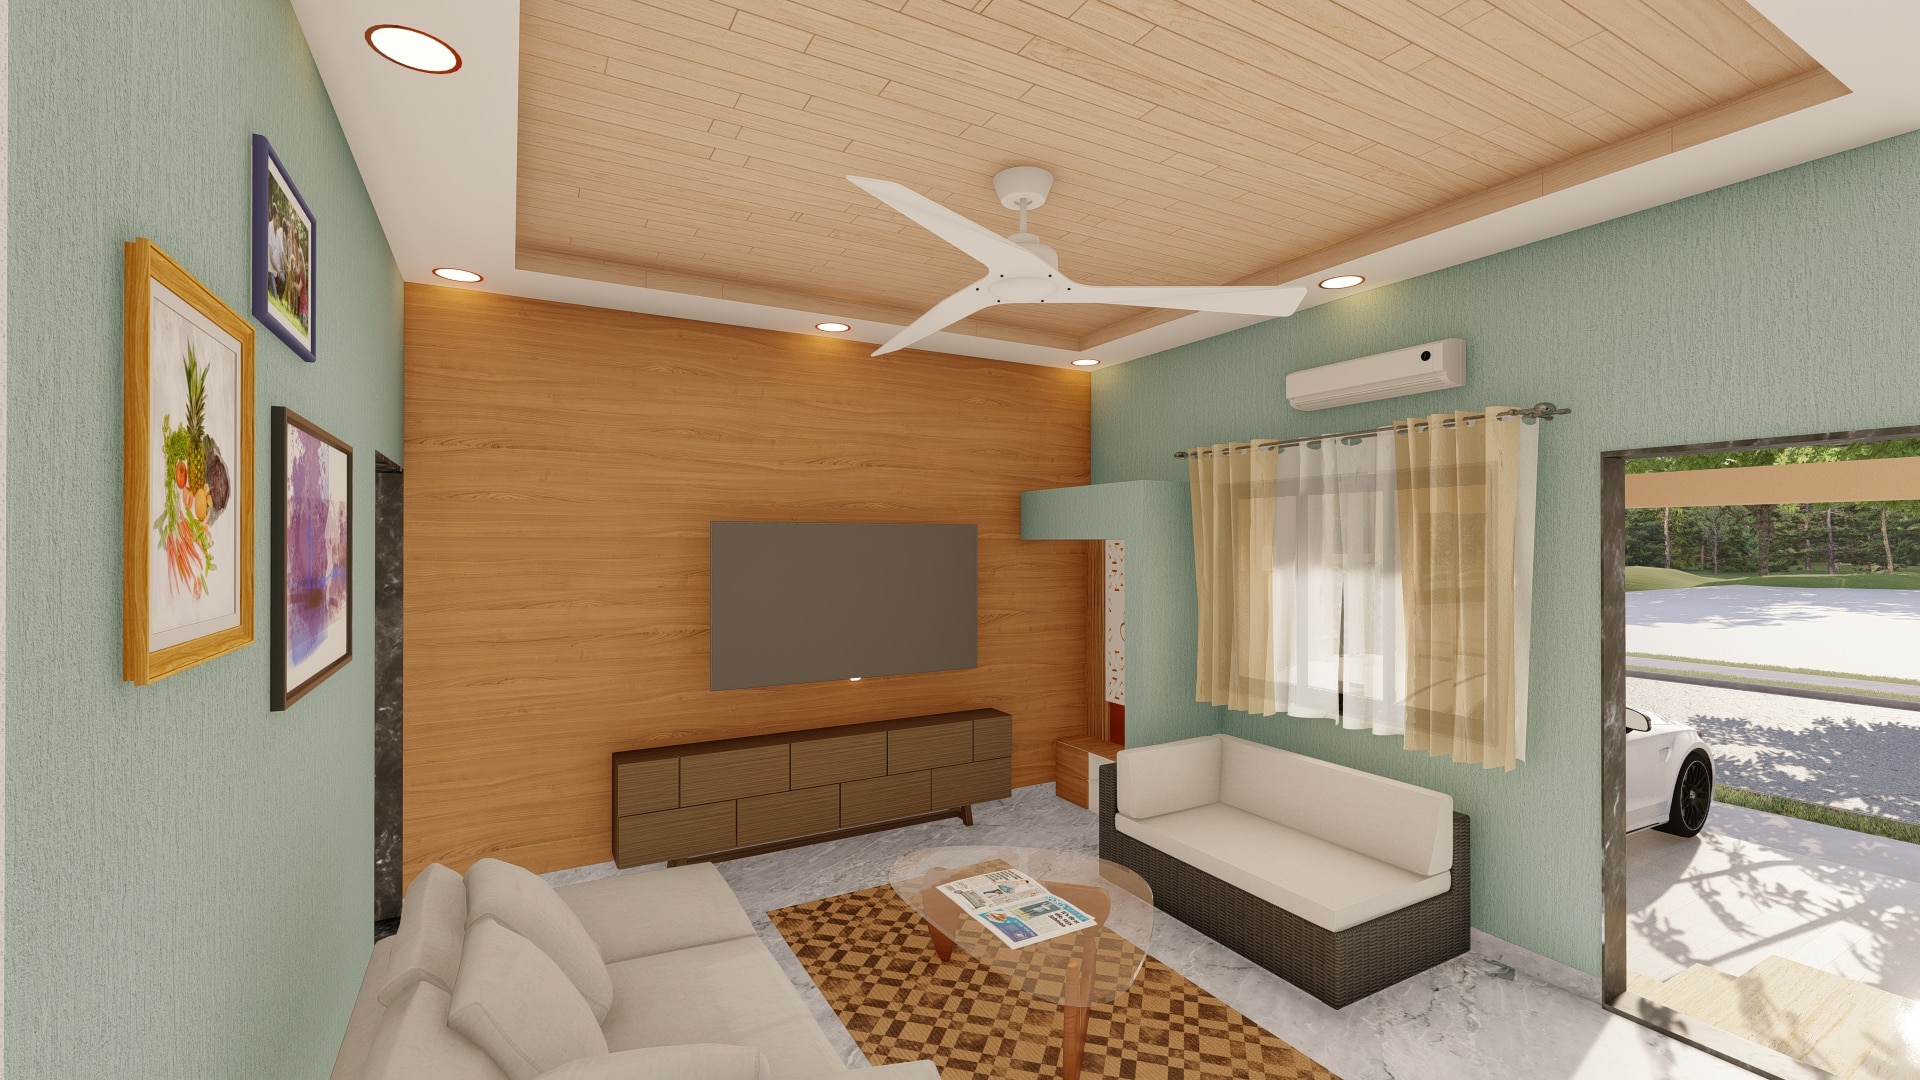 living room of modern bungalow house layout by urban terrace east facing 30x50 sq ft